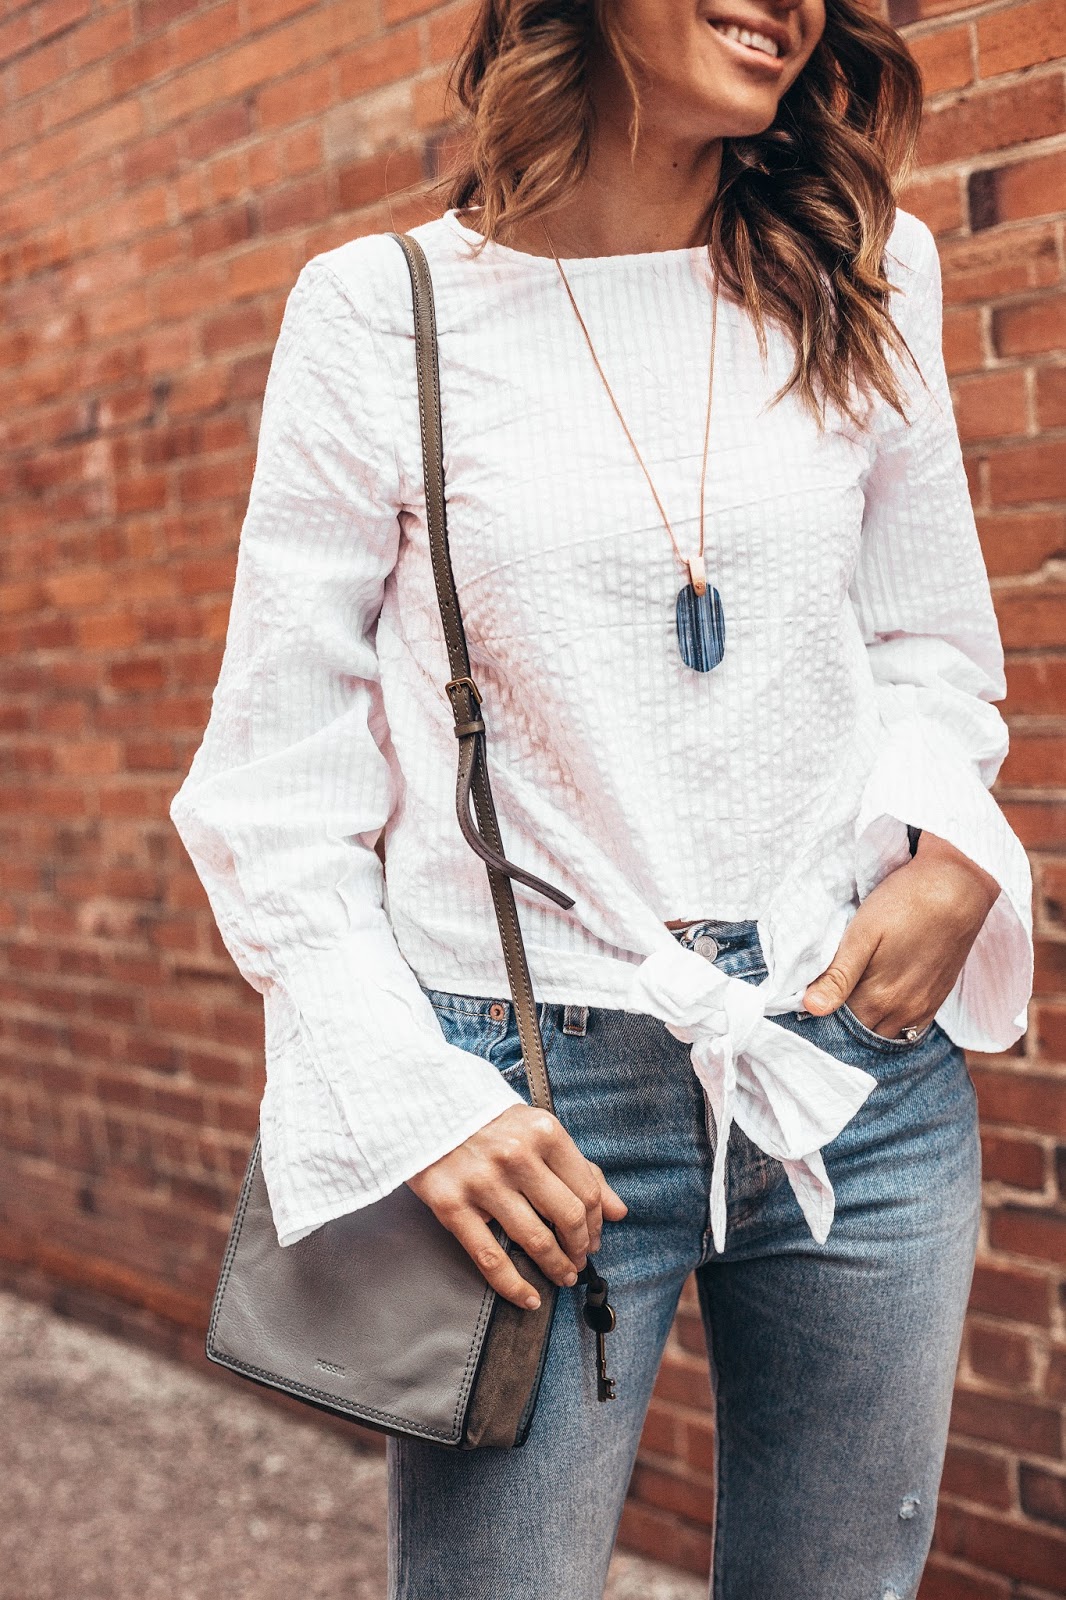 5 Cute White Tops For Spring by popular Colorado style blogger Eat Pray Wear Love